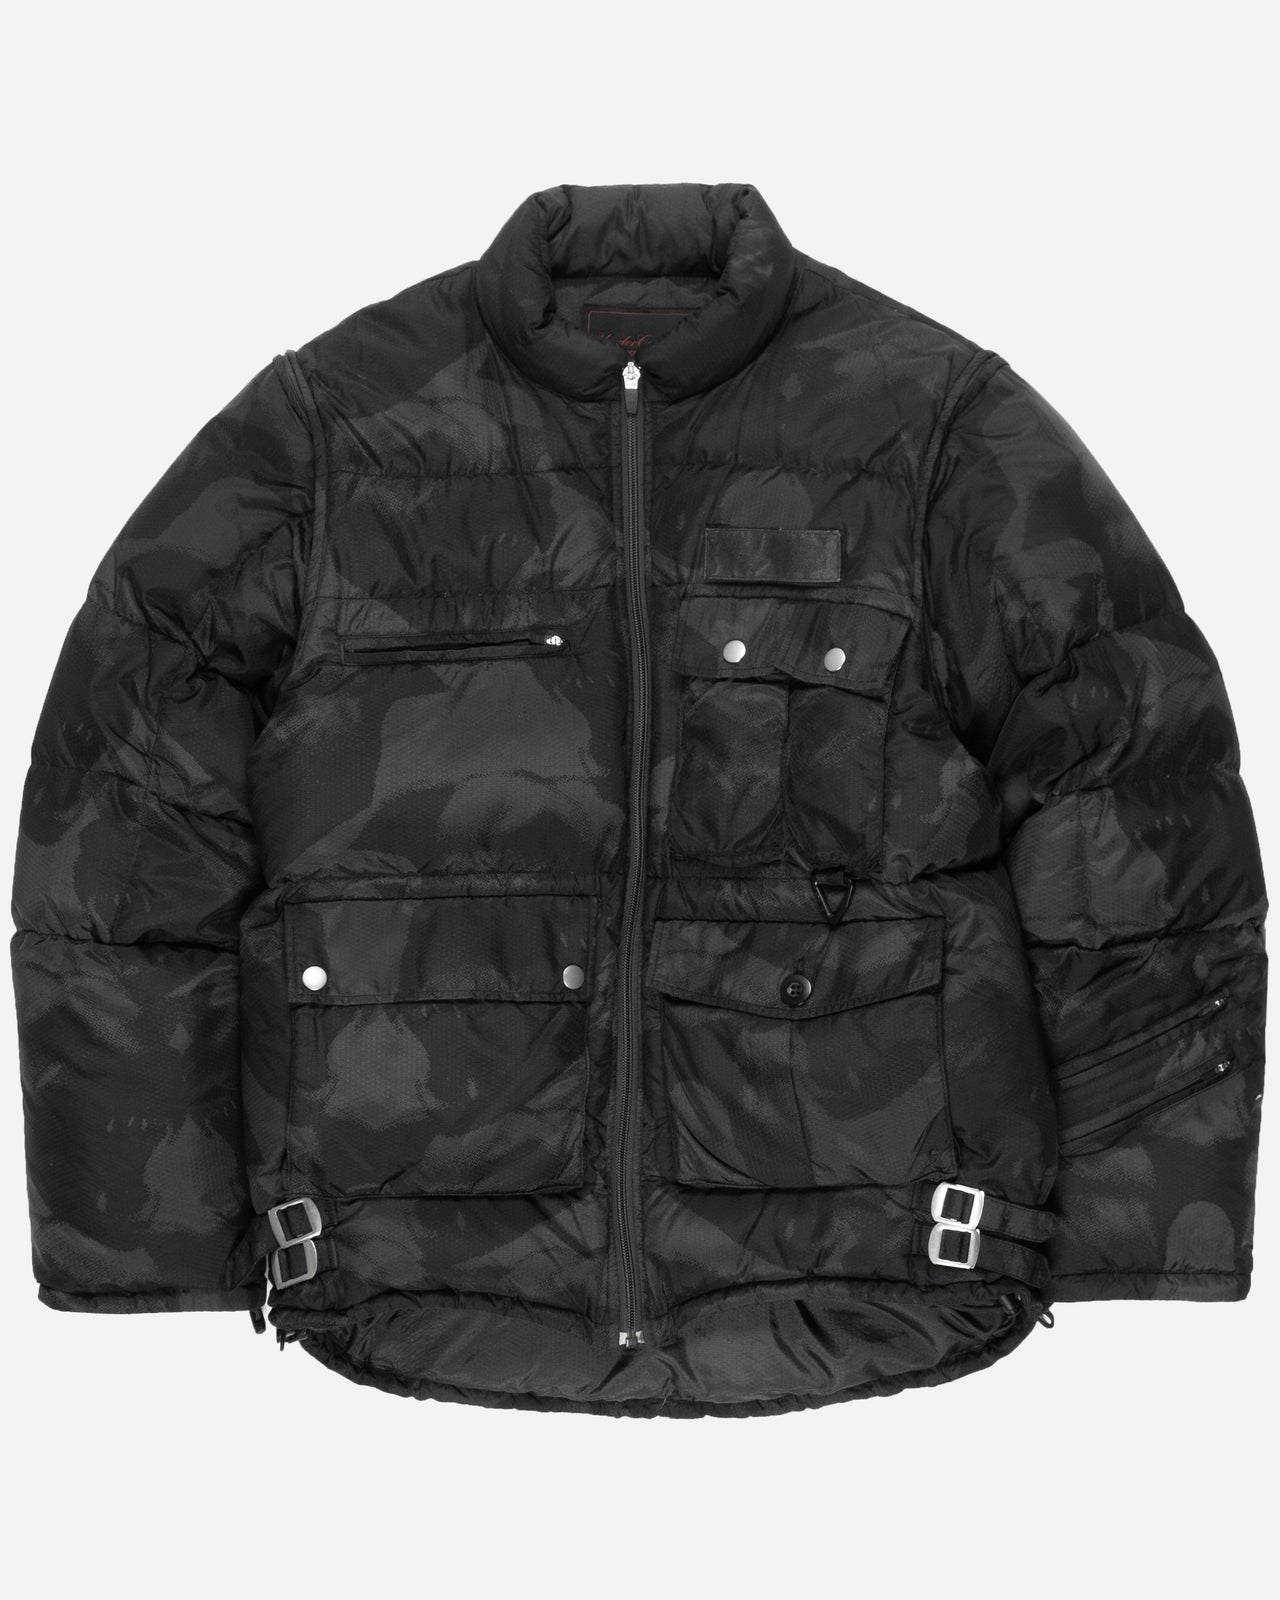 Undercover Dog Camo Puffer - AW03 “Paperdoll”